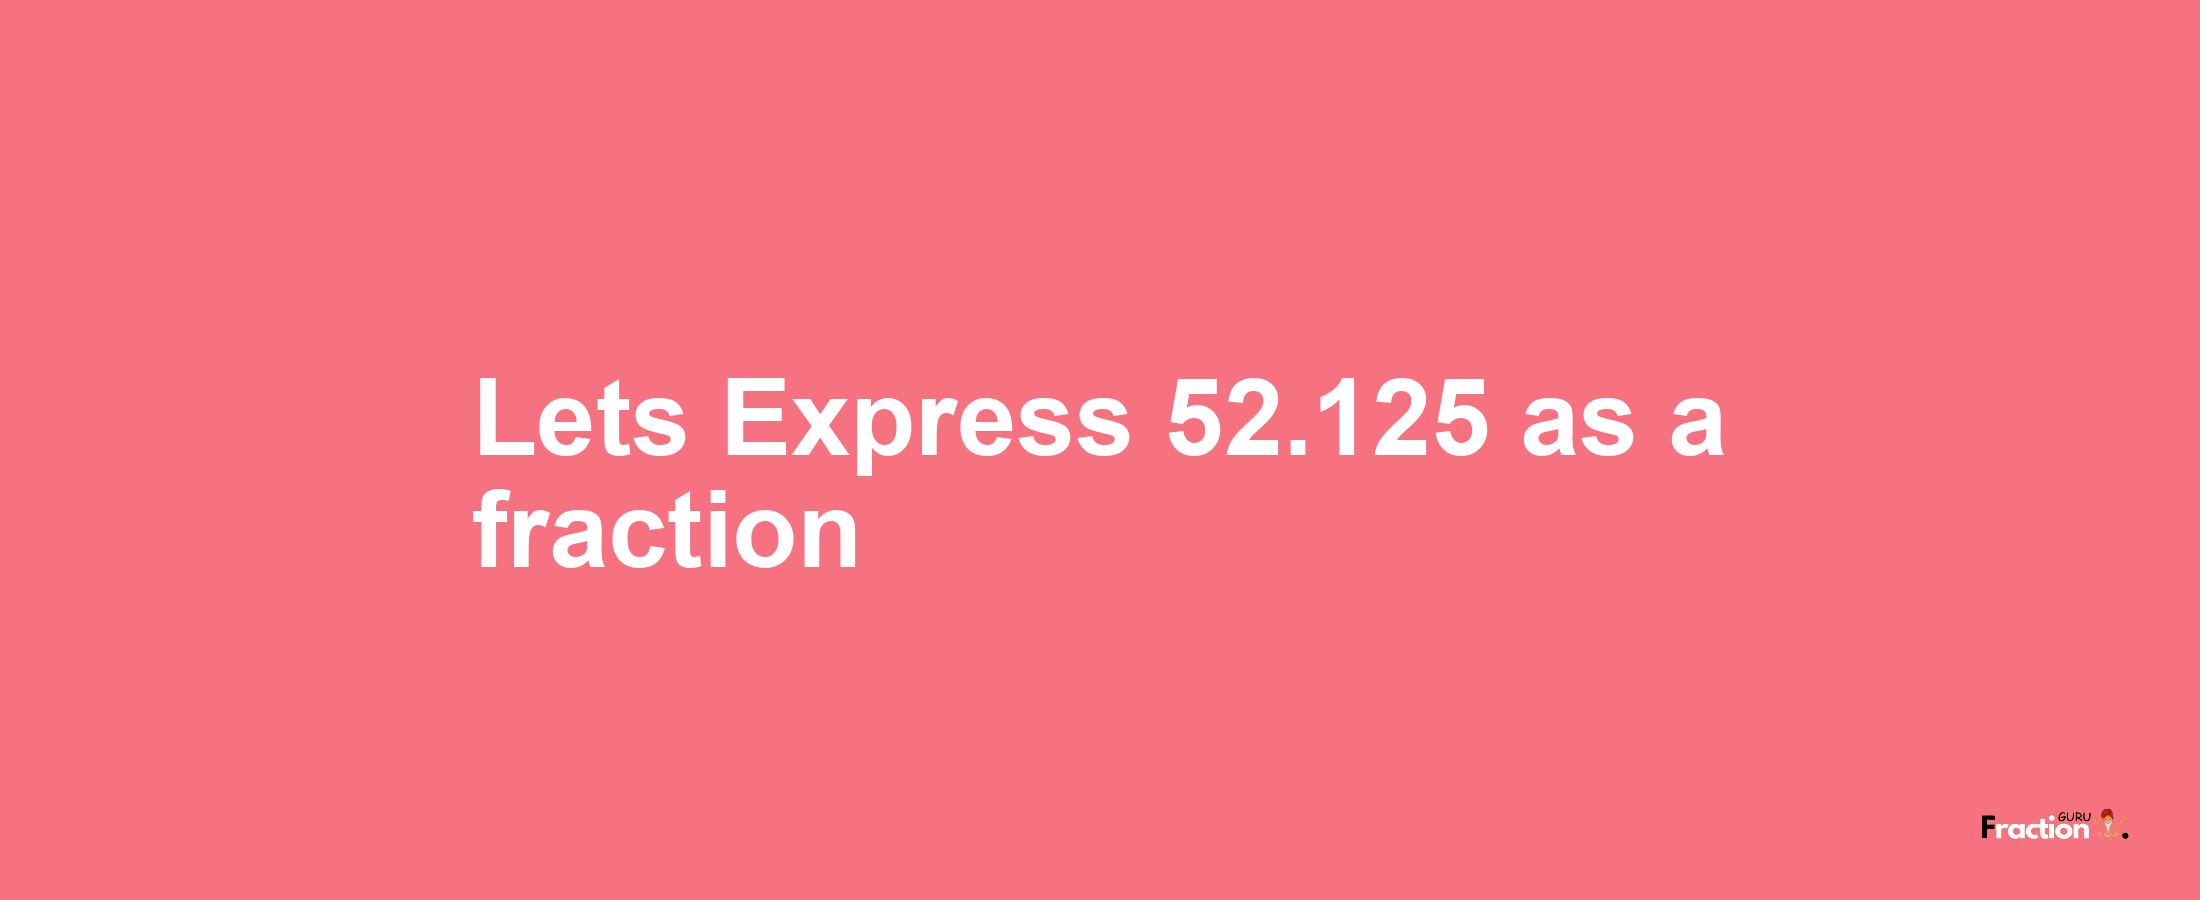 Lets Express 52.125 as afraction